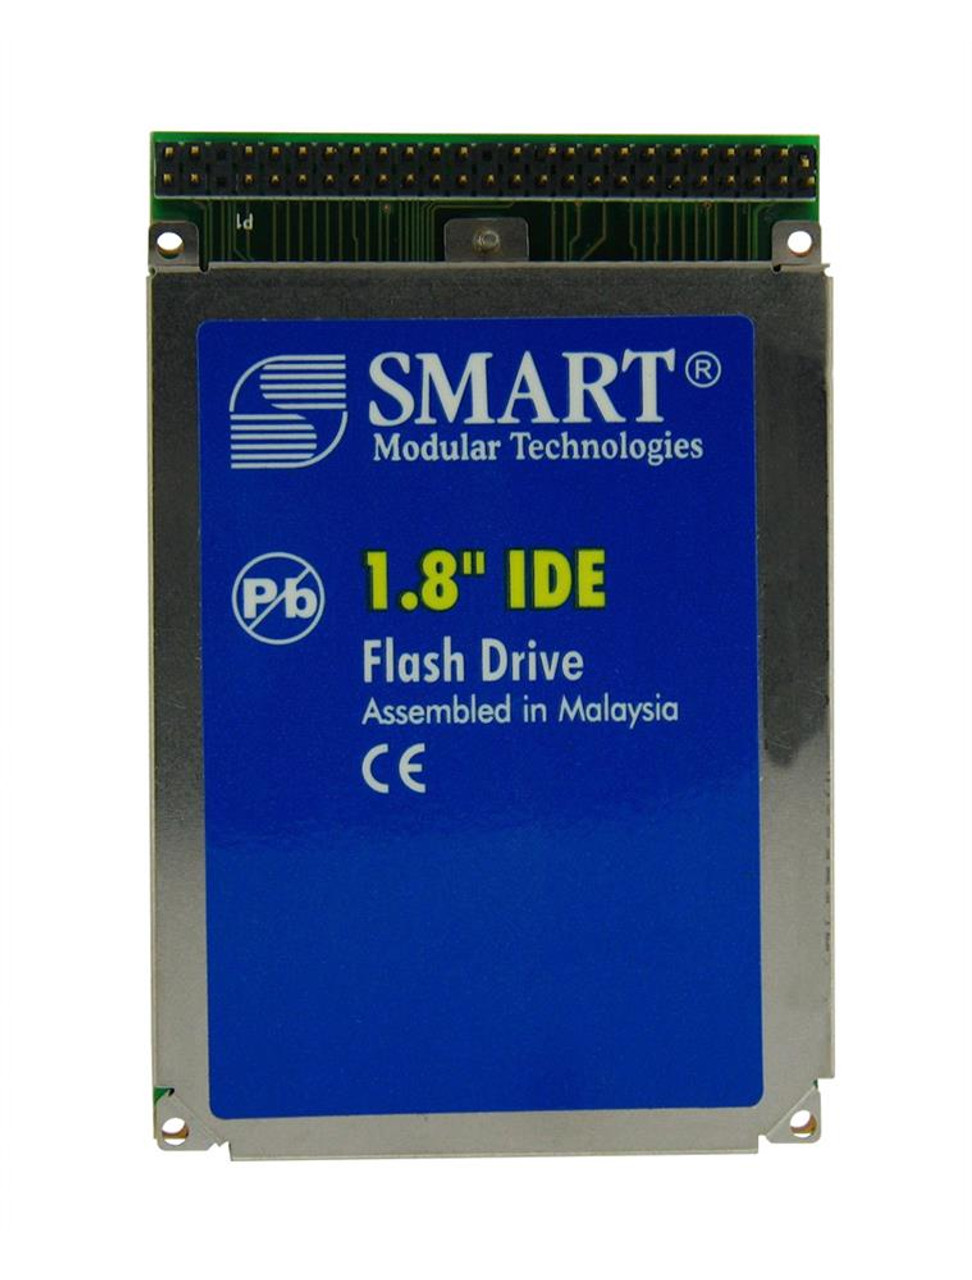 Smart 8GB ATA/IDE (PATA) 1.8-inch Internal Solid State Drive (SSD) Mfr P/N SG9IDE1D8GSMCAX